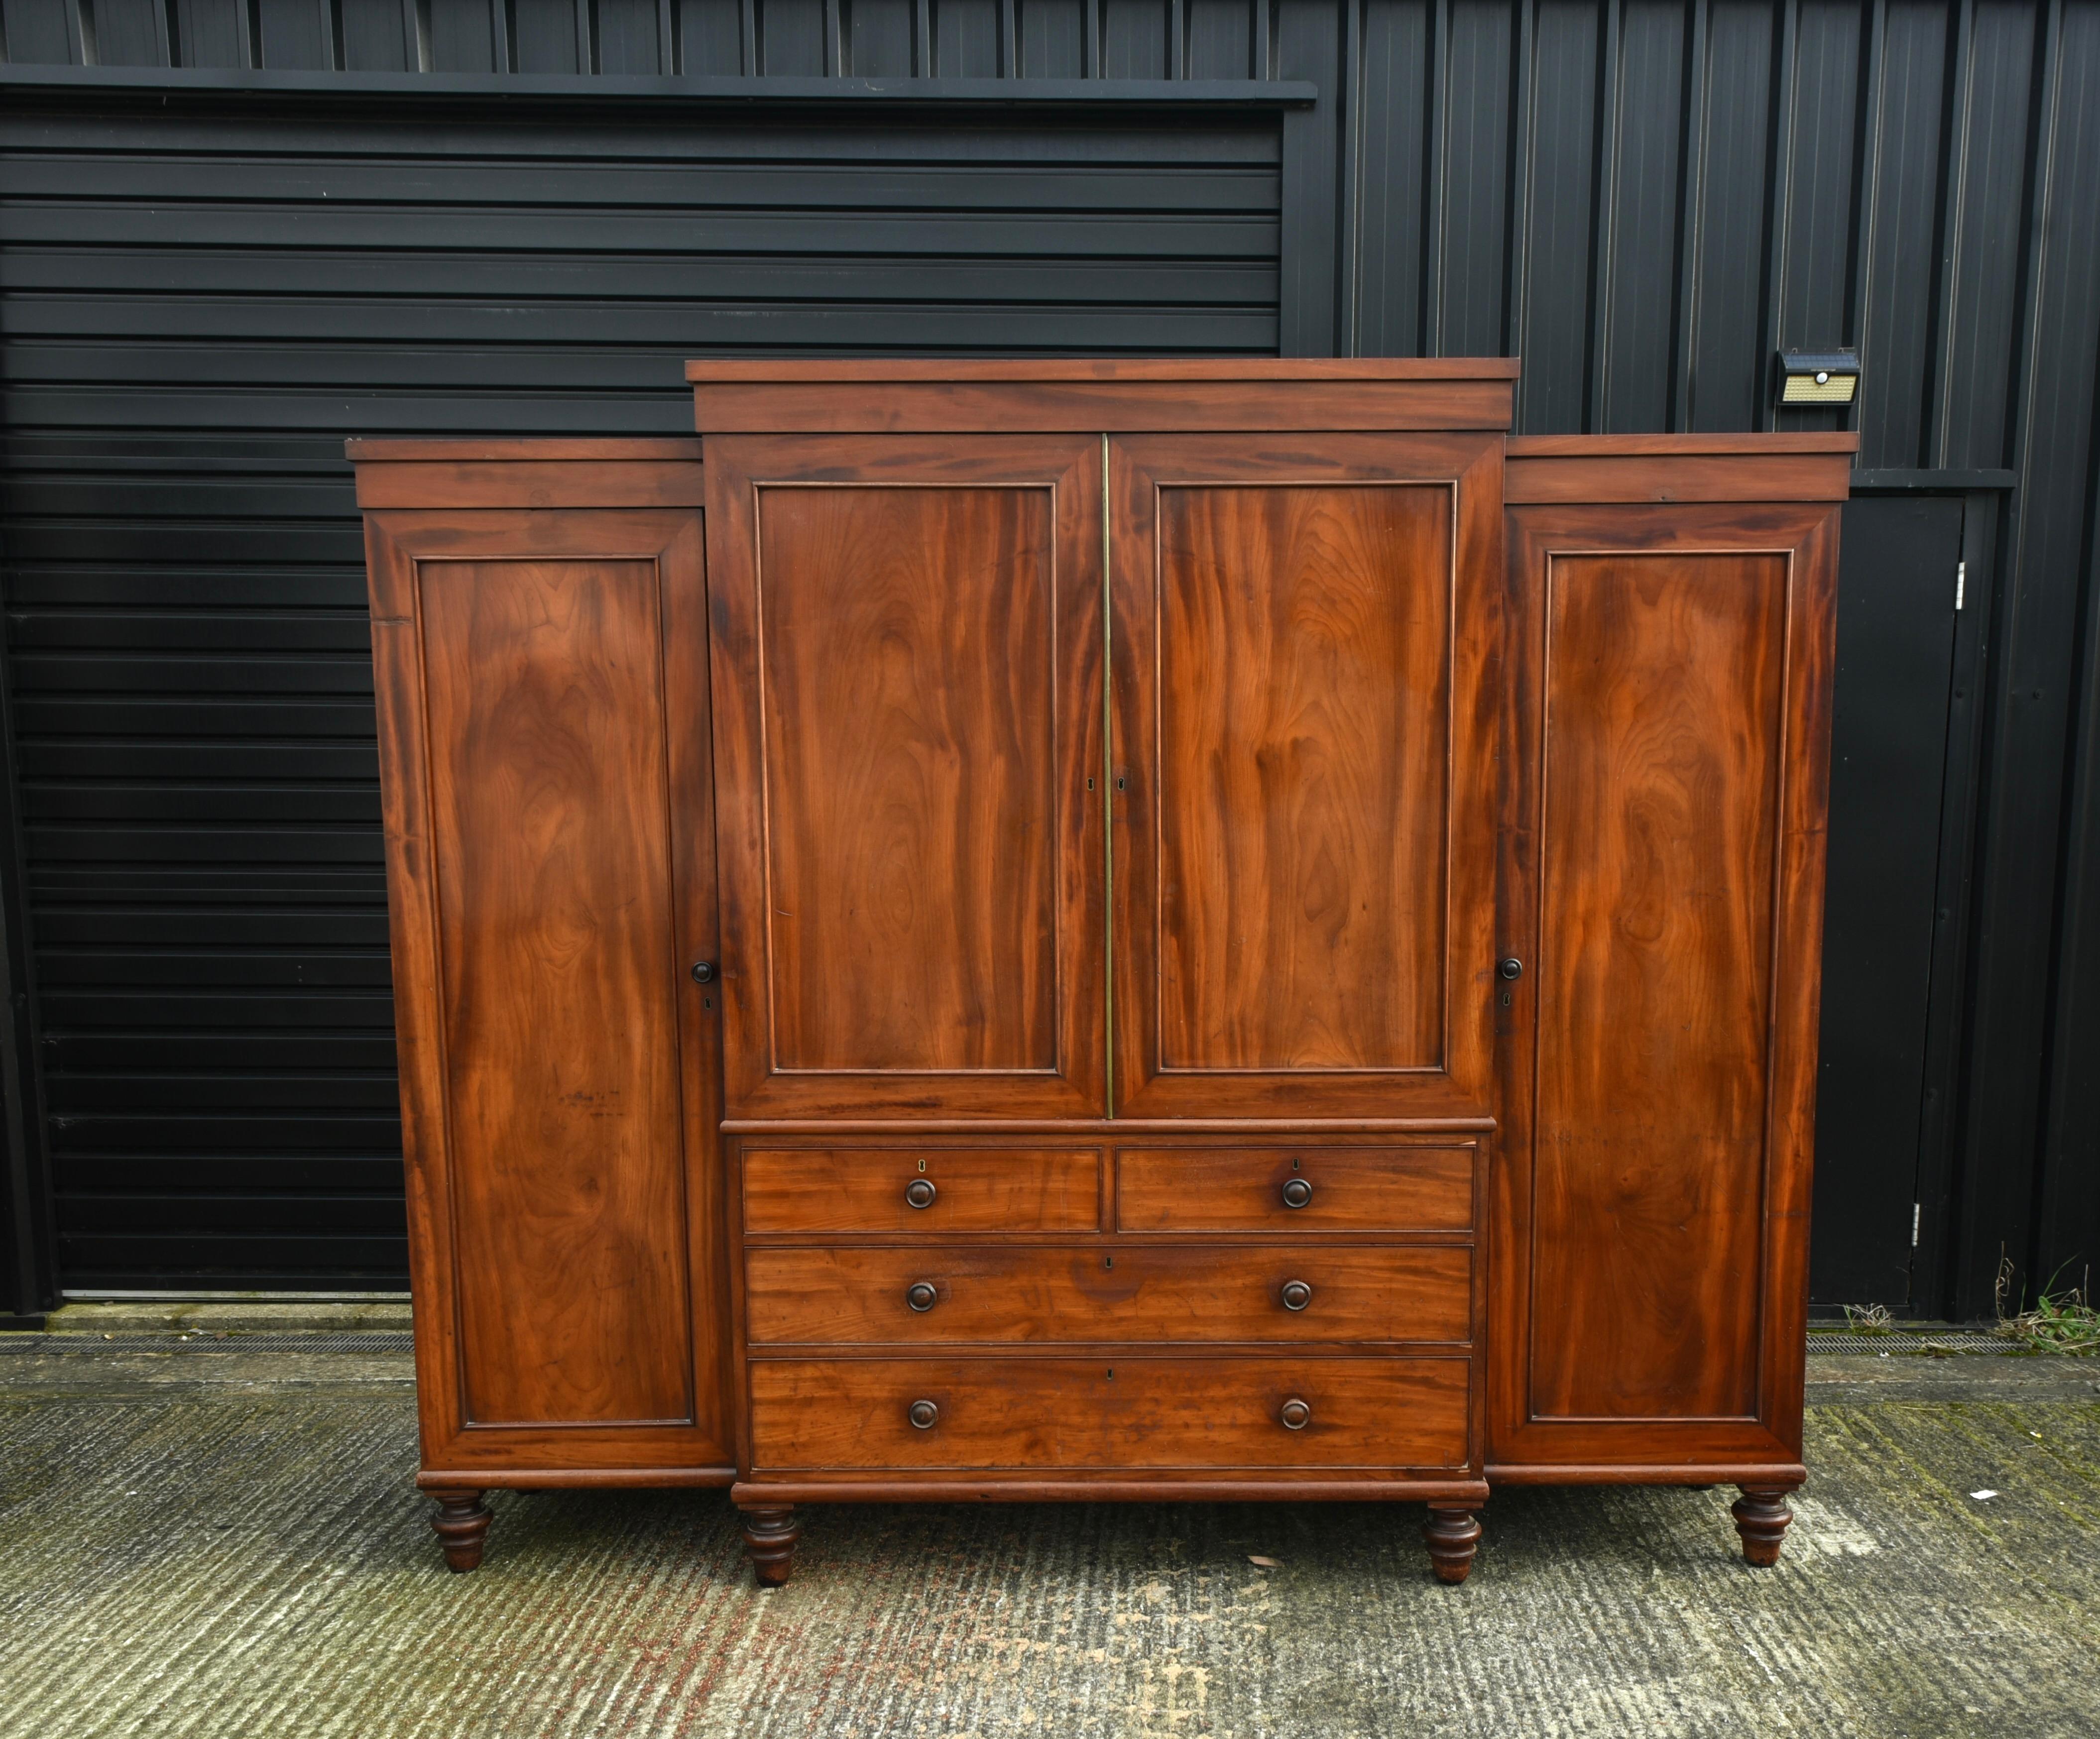 This is a large 19th Century (c.1830) antique mahogany breakfront wardrobe that is in great condition with a good grain and wonderful antique patina. It is constructed of solid mahogany and oak throughout. The centre section has 5 large slide out